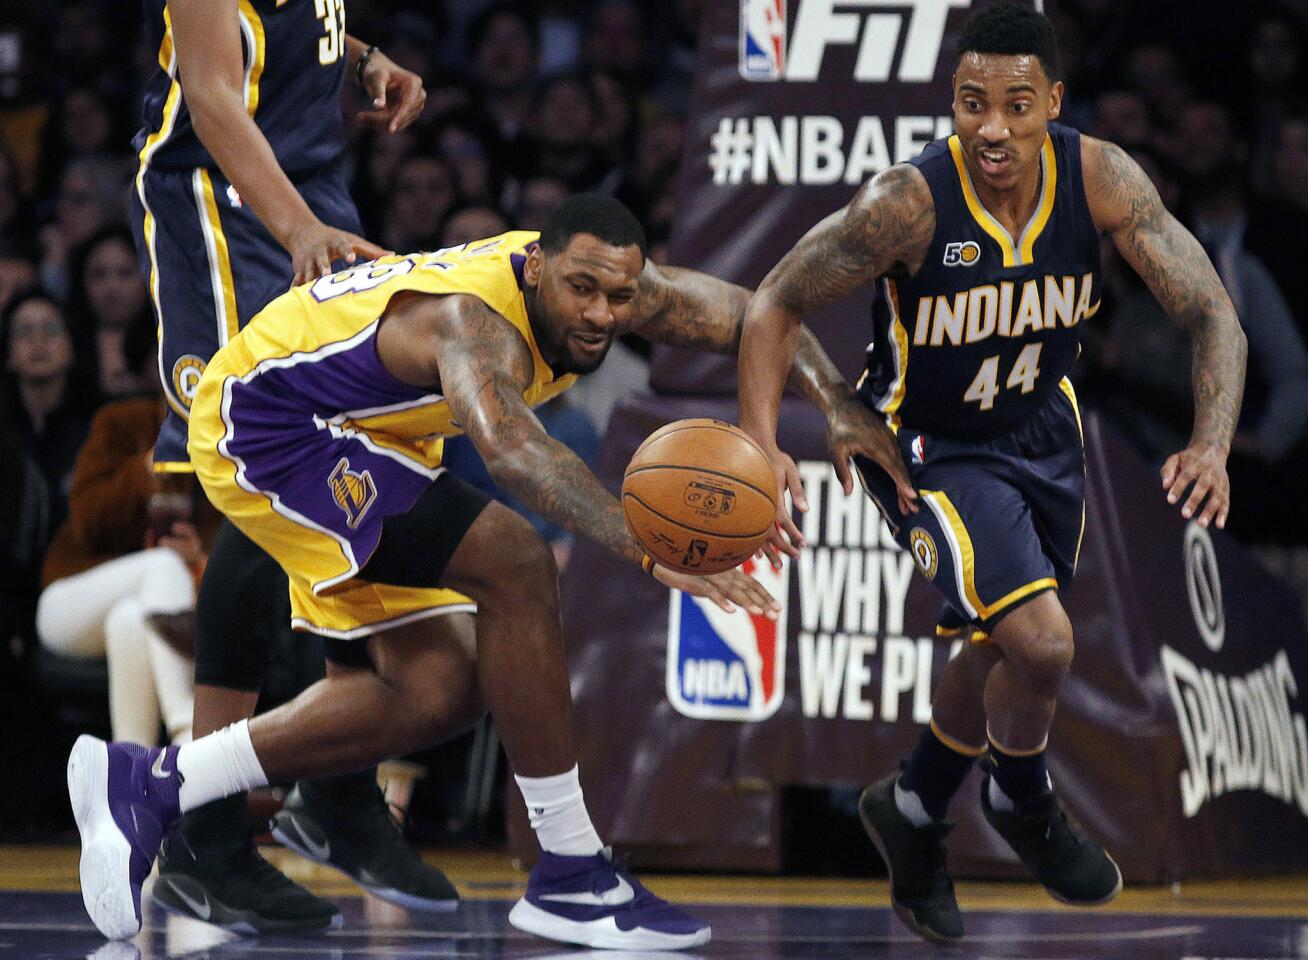 Lakers center Tarik Black goes after a loose ball next to Pacers guard Jeff Teague (44) during the first half.